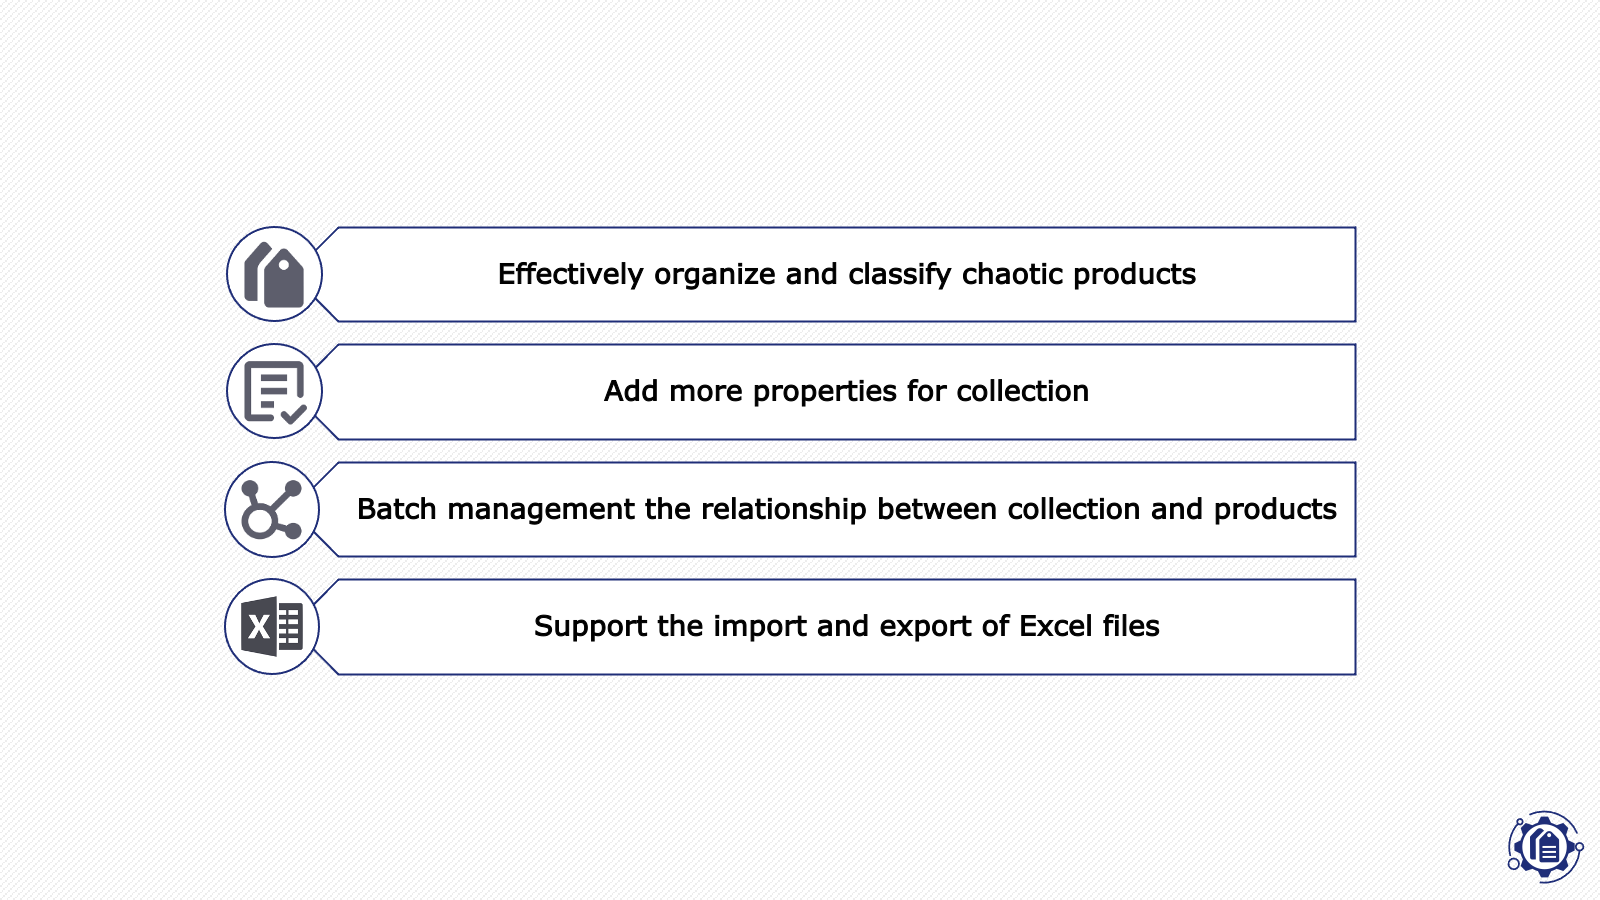 Batch management the relationship between collection and product